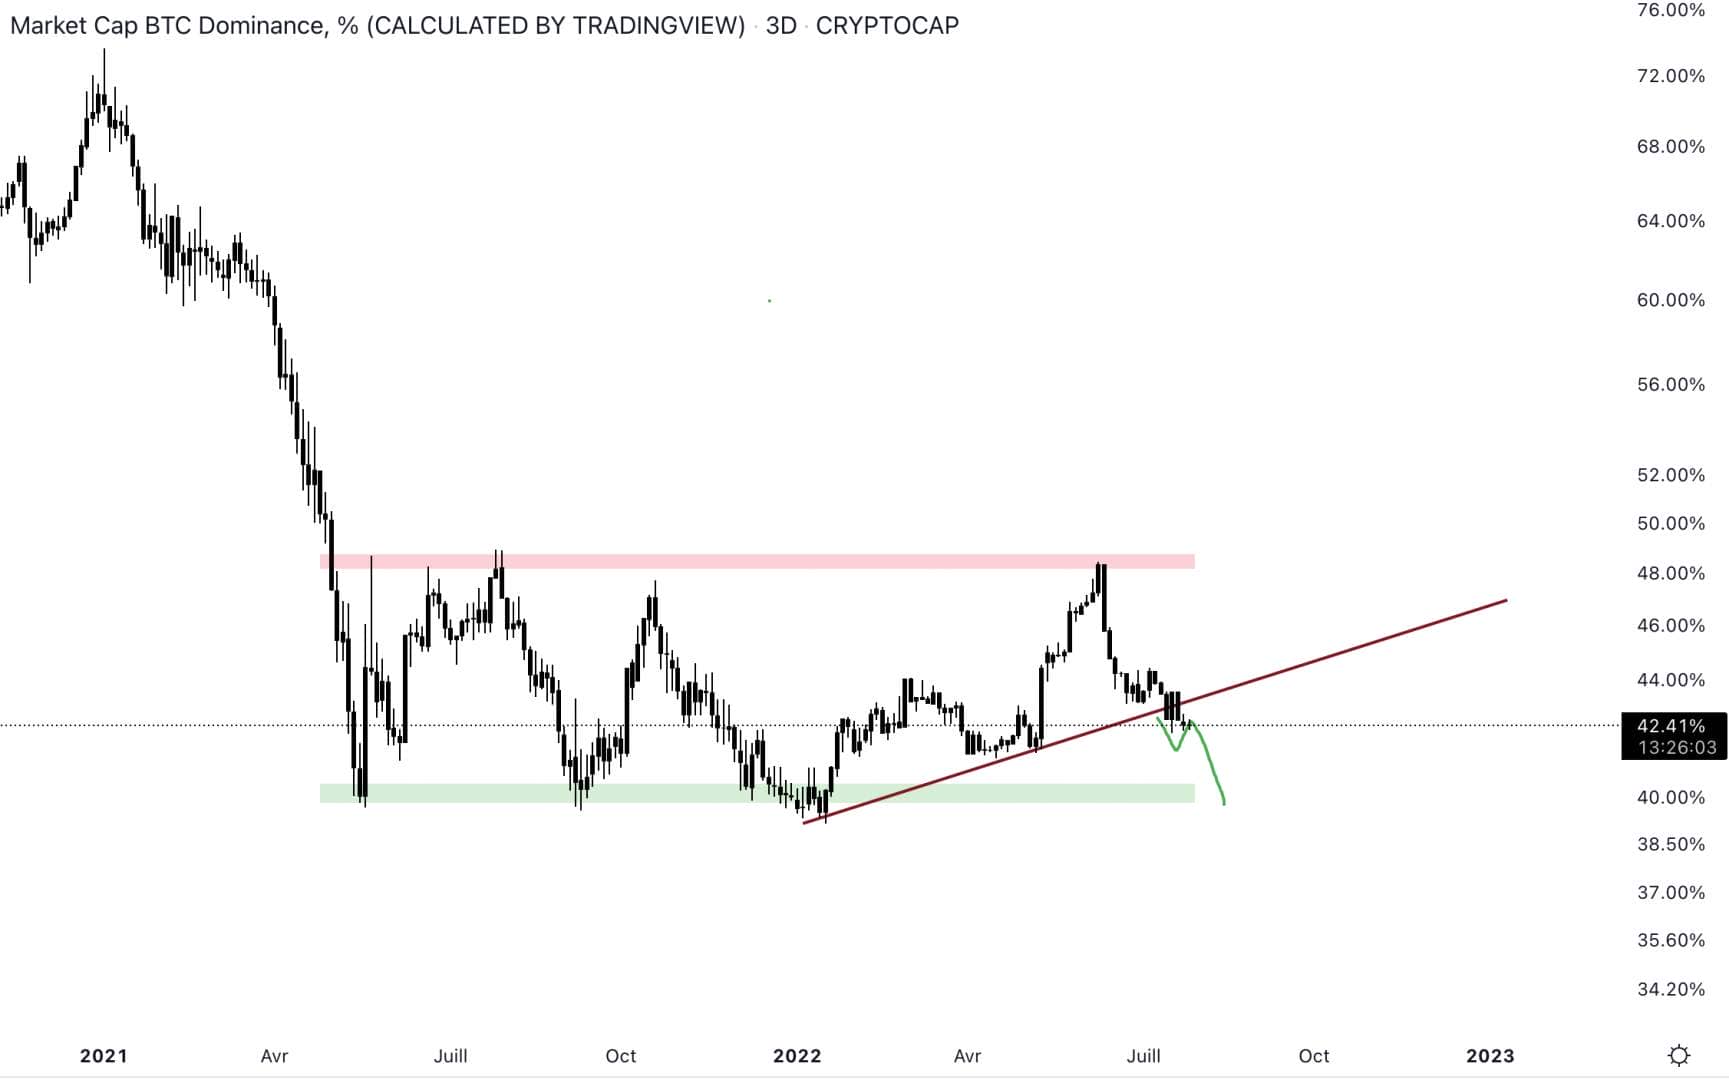 Bitcoin's dominance is dwindling and heading towards support.